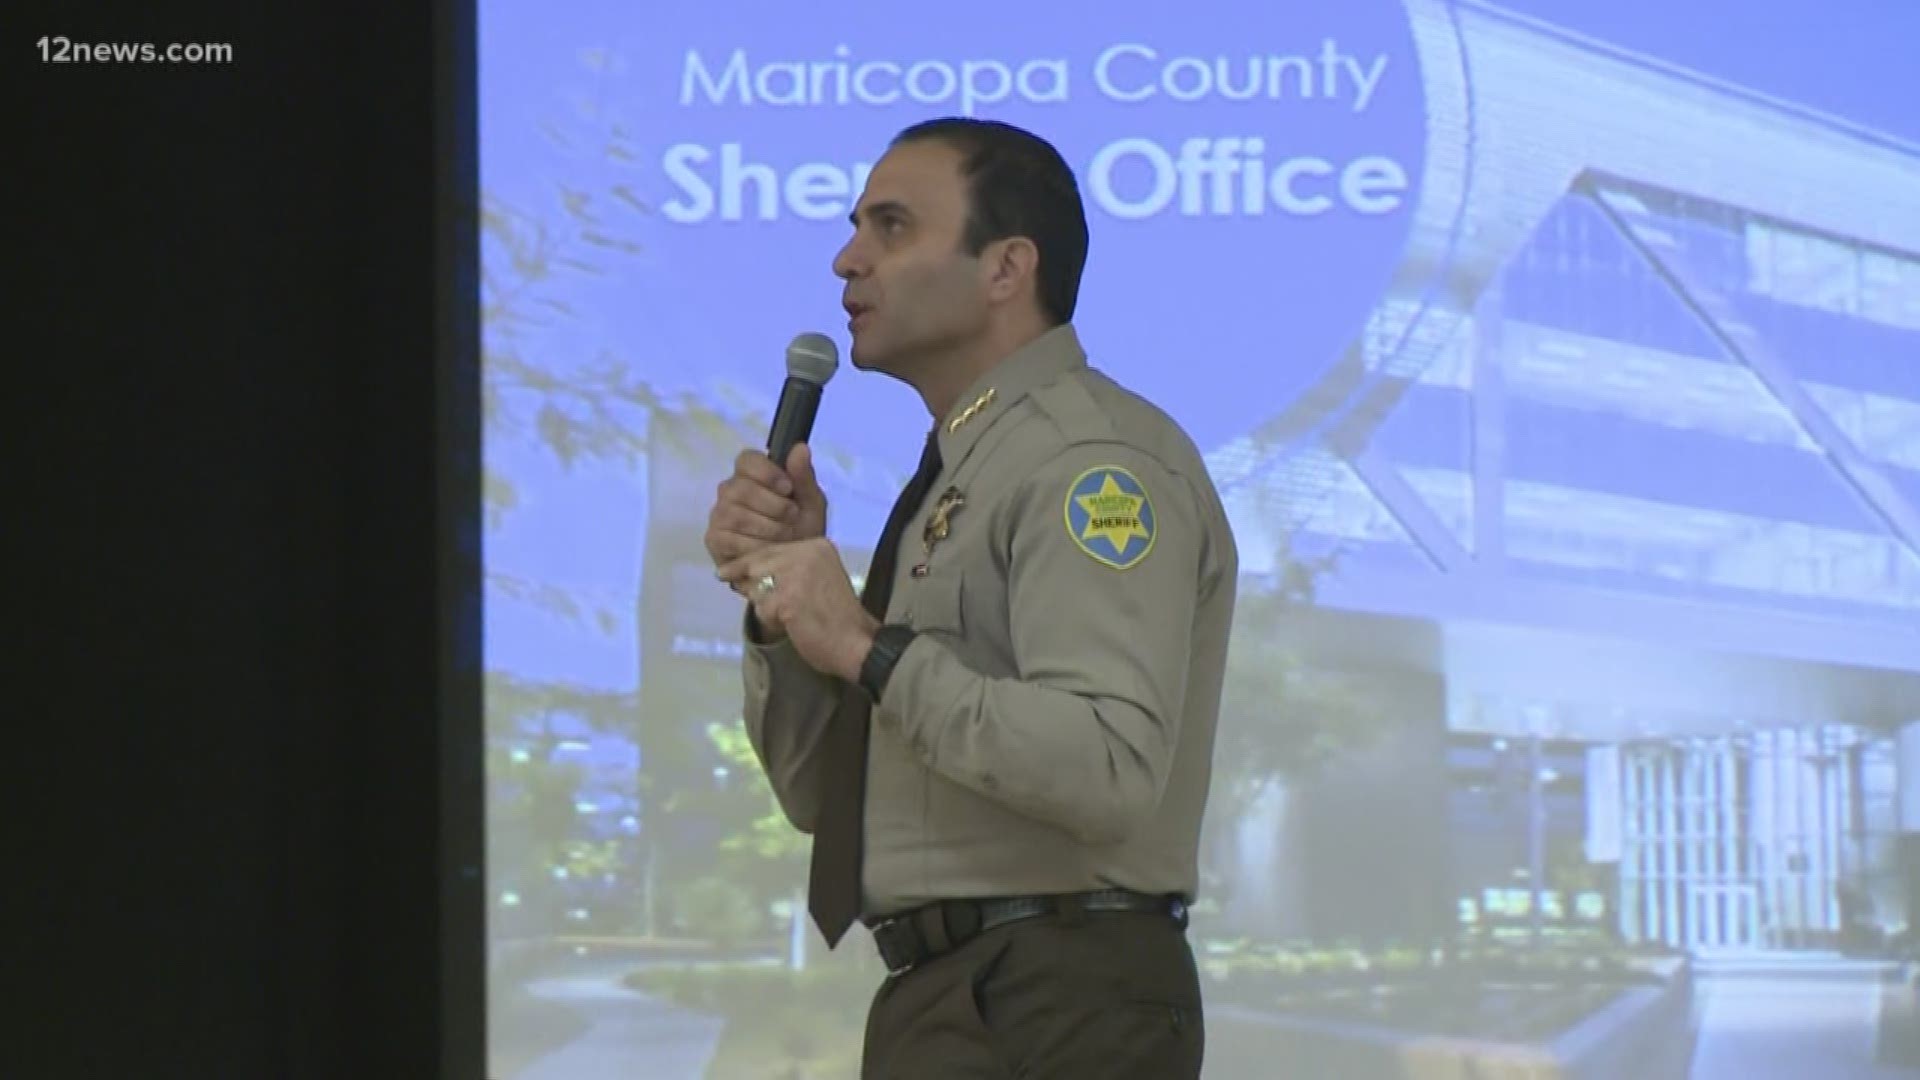 Volunteer posse members from the Maricopa County Sheriff's Office could be back on patrol in Sun City West within the next 60 days. Sheriff Paul Penzone suspended the posse just days ago because of concerns that many members hadn't completed background checks and psychiatric exams.